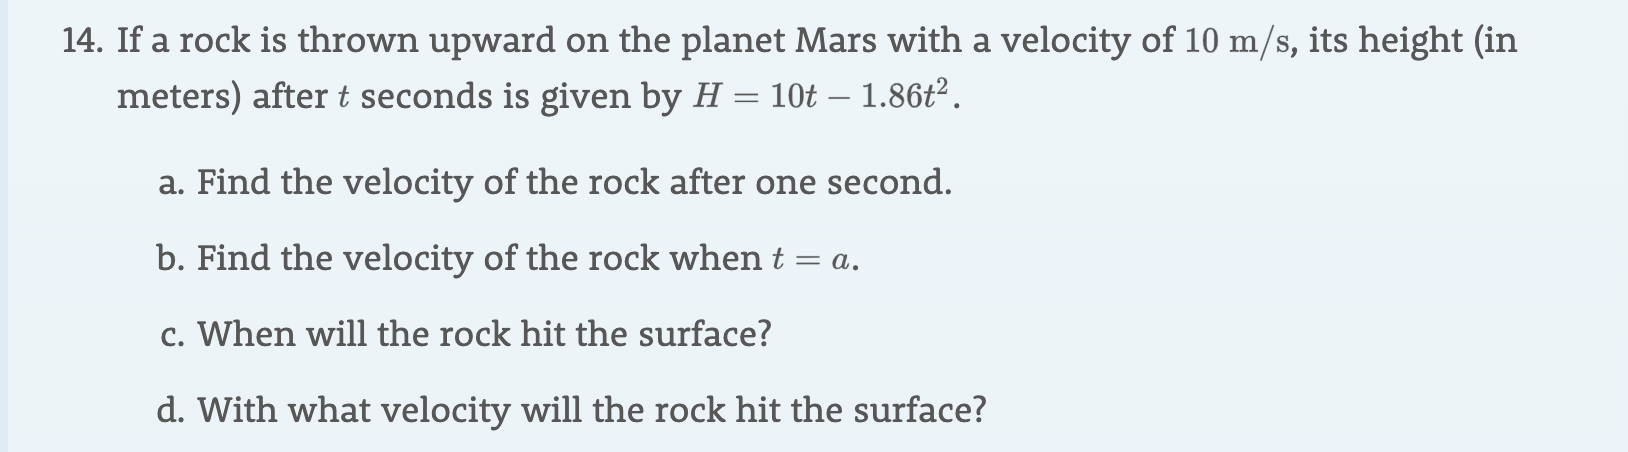 14. If a rock is thrown upward on the planet Mars with a velocity of 10 m/s, its height (in
meters) after t seconds is given by H = 10t - 1.86t2
a. Find the velocity of the rock after one second.
b. Find the velocity of the rock when t = a
c. When will the rock hit the surface?
d. With what velocity will the rock hit the surface?
